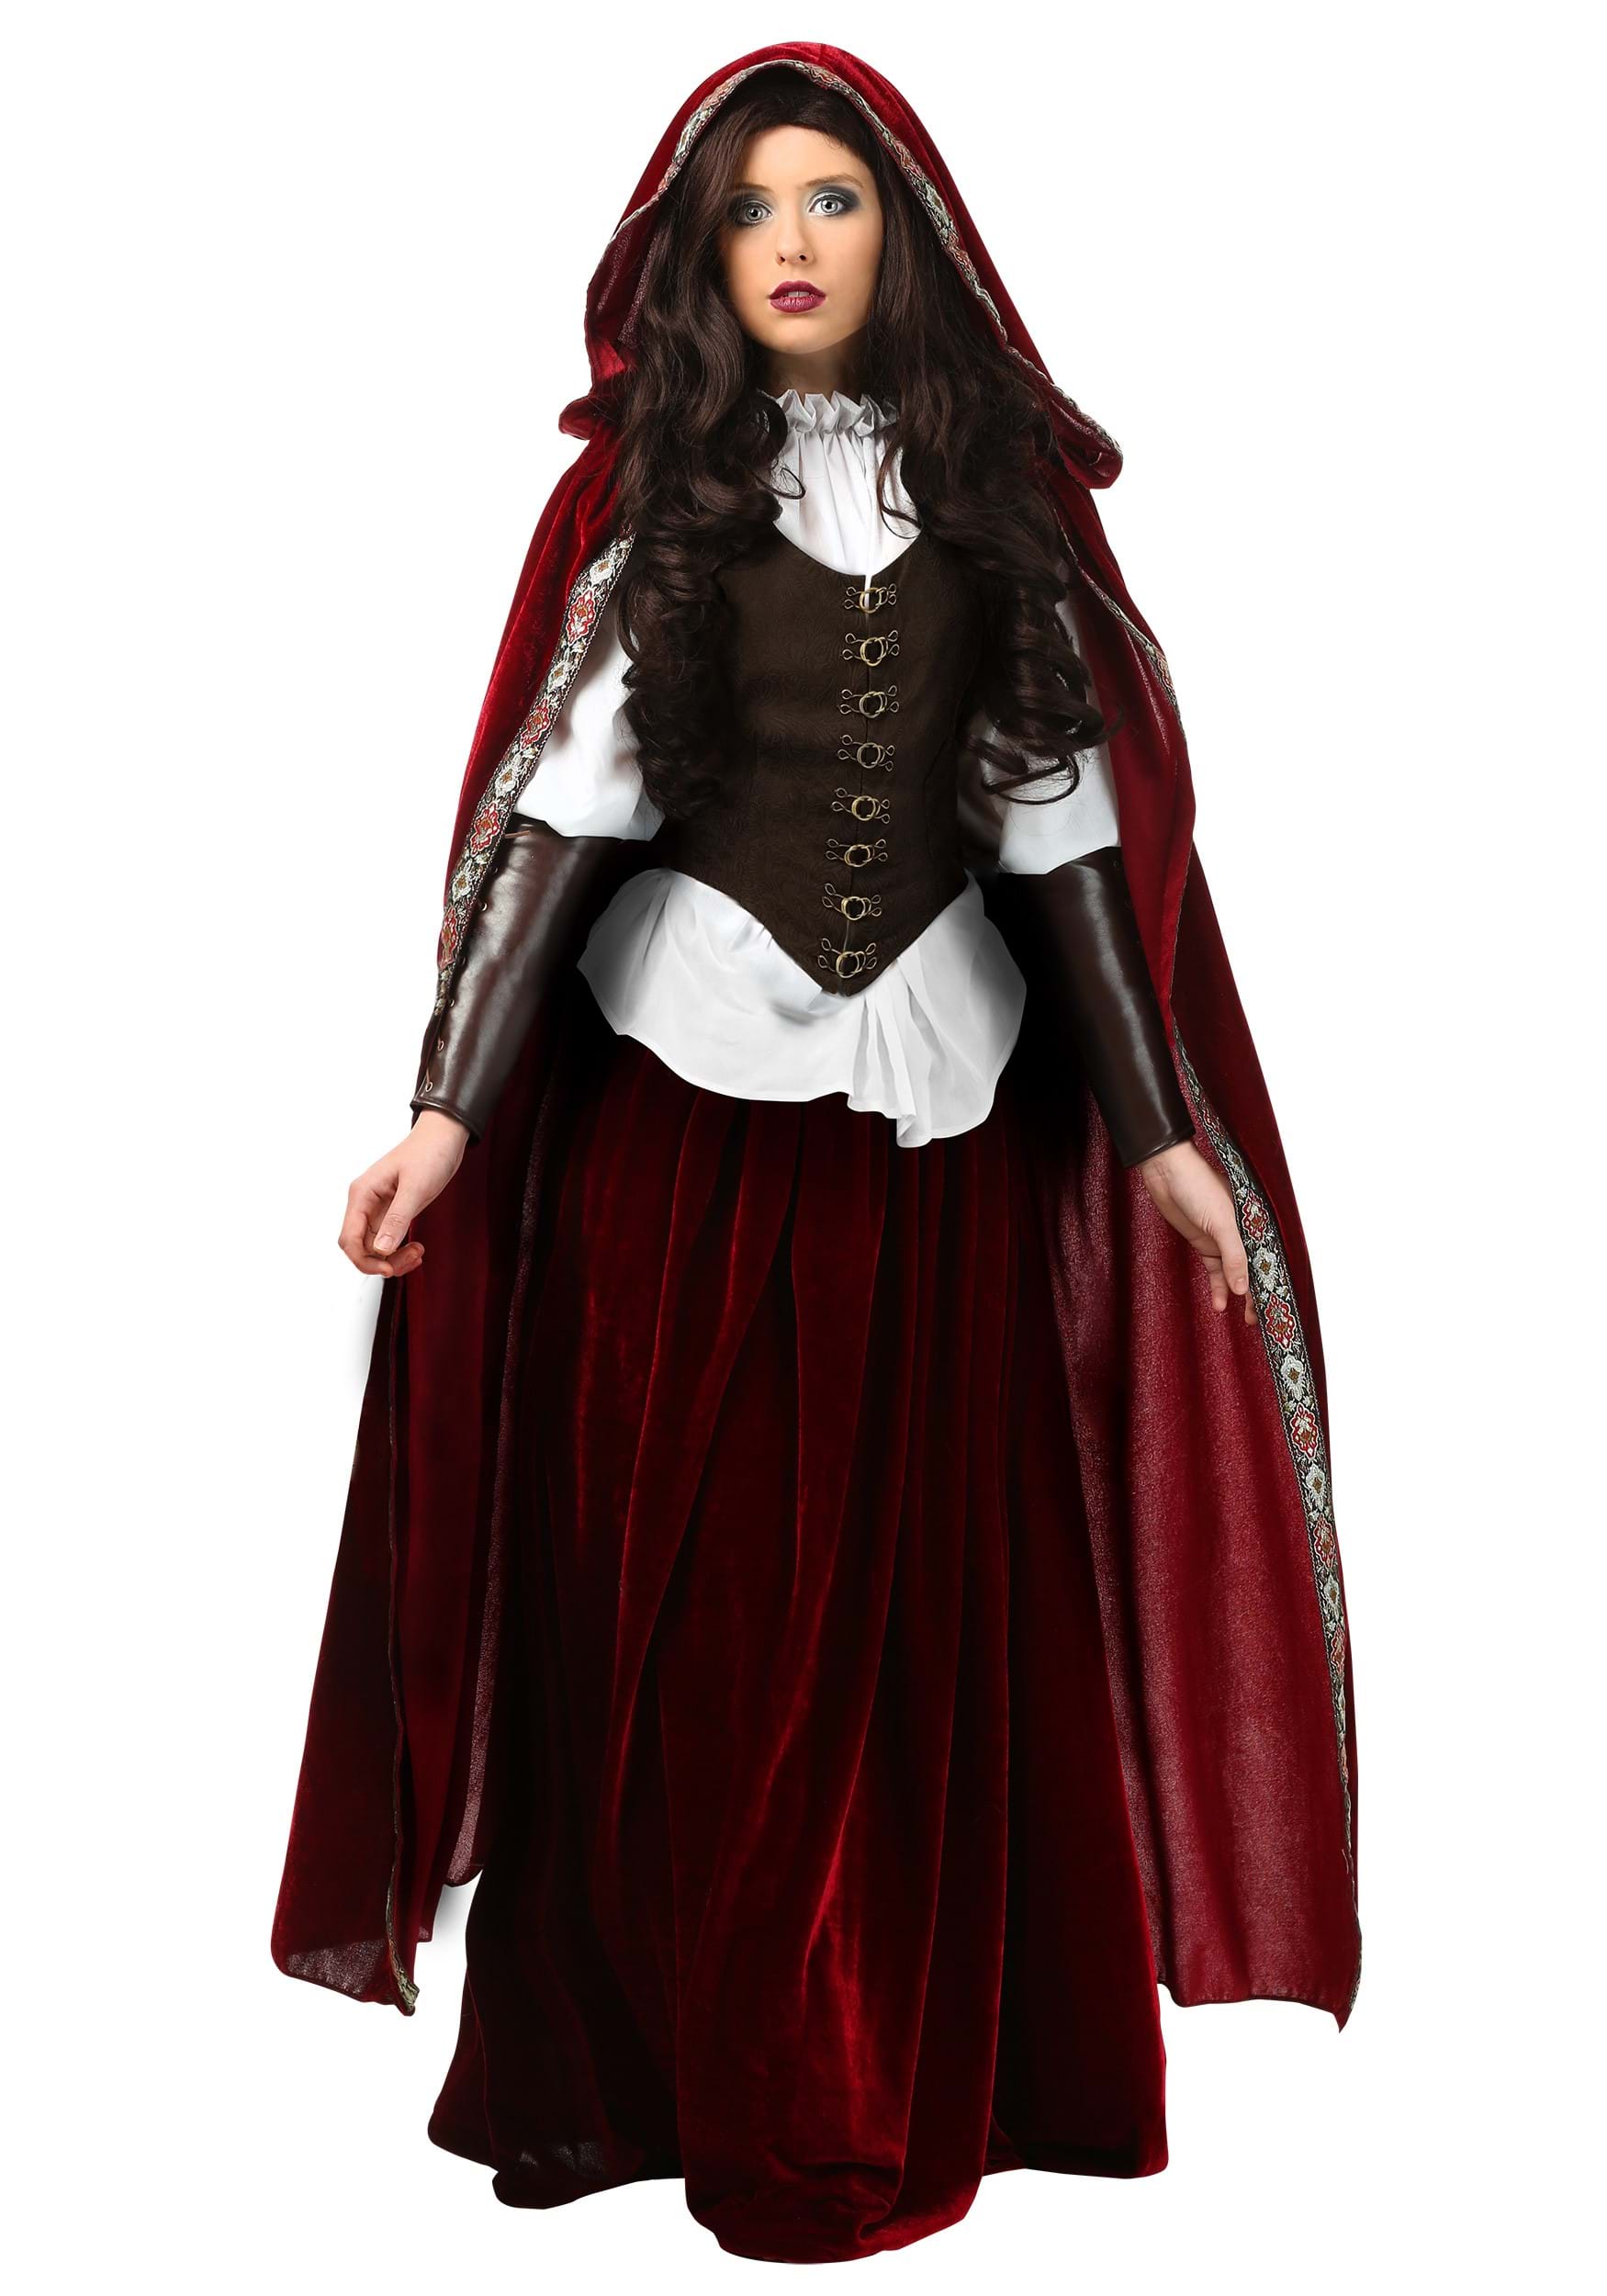 Deluxe Red Riding Hood Costume for Women